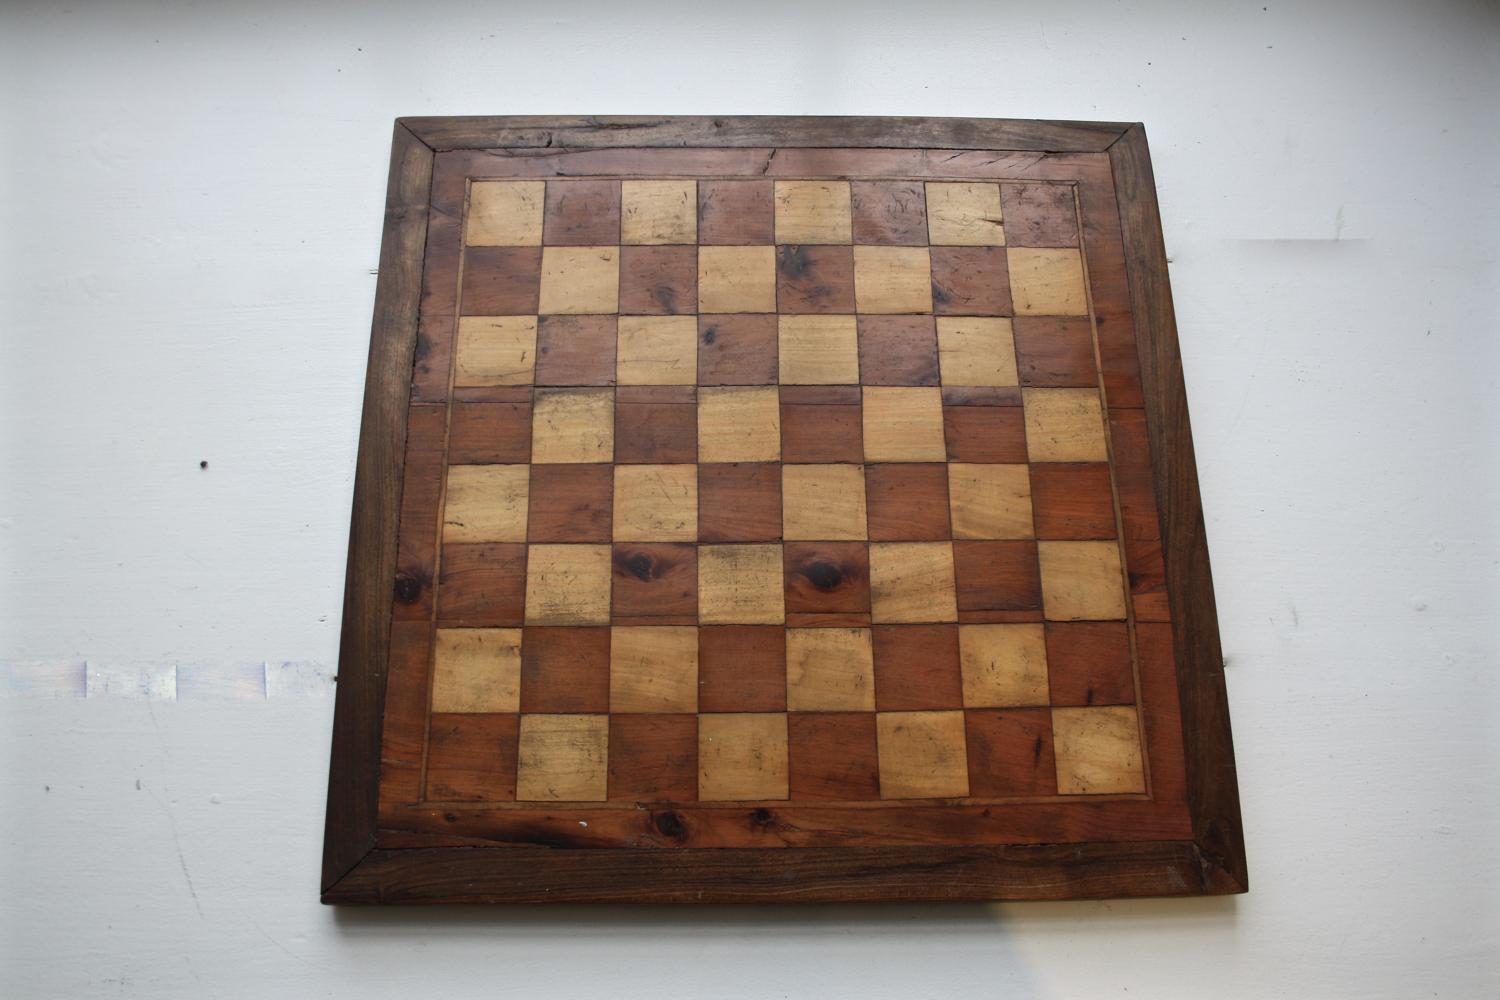 Wooden chess/draughts board